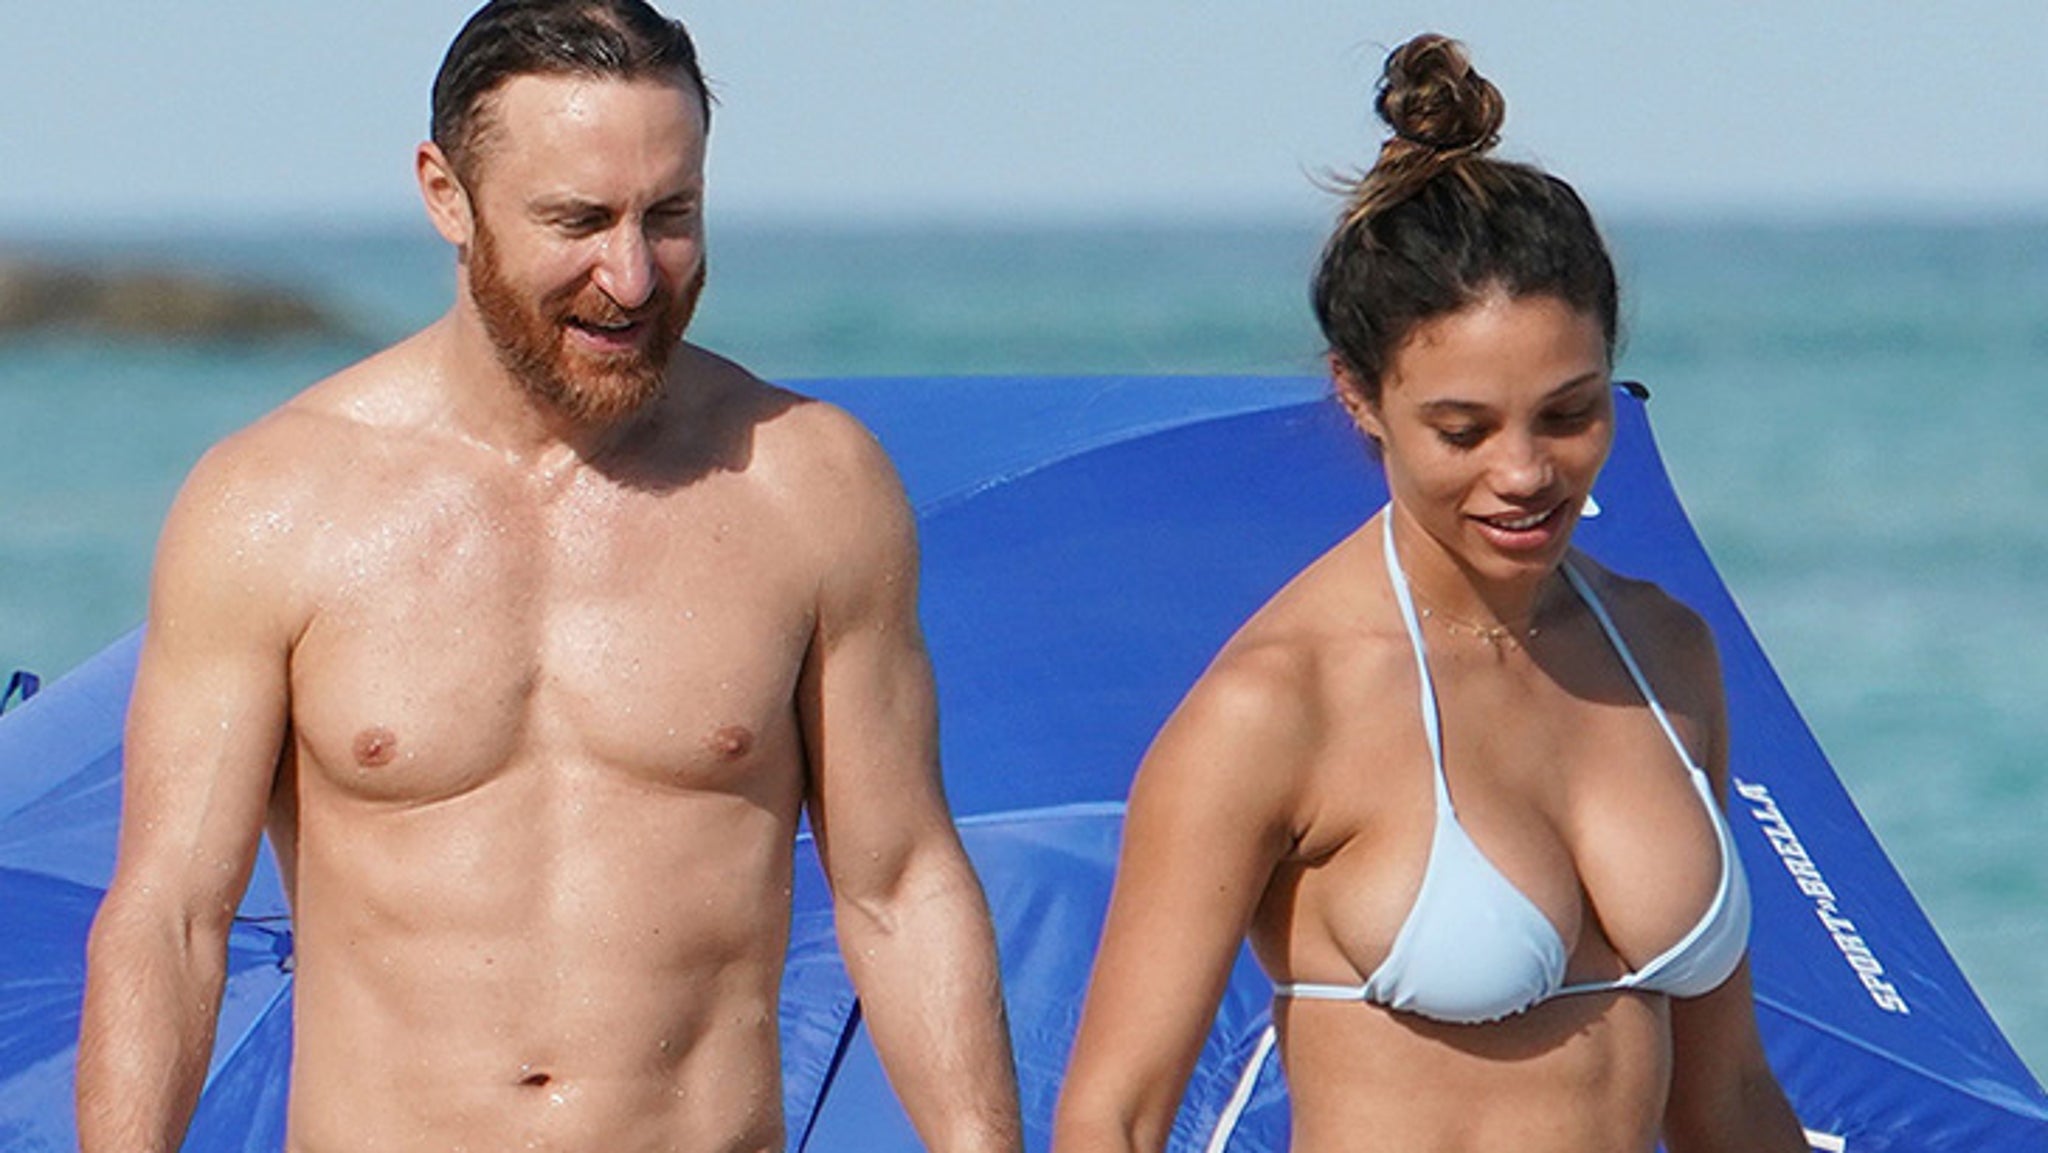 David Guetta Shirtless in Miami But Hot GF Steals the Show with Diamond Rin...